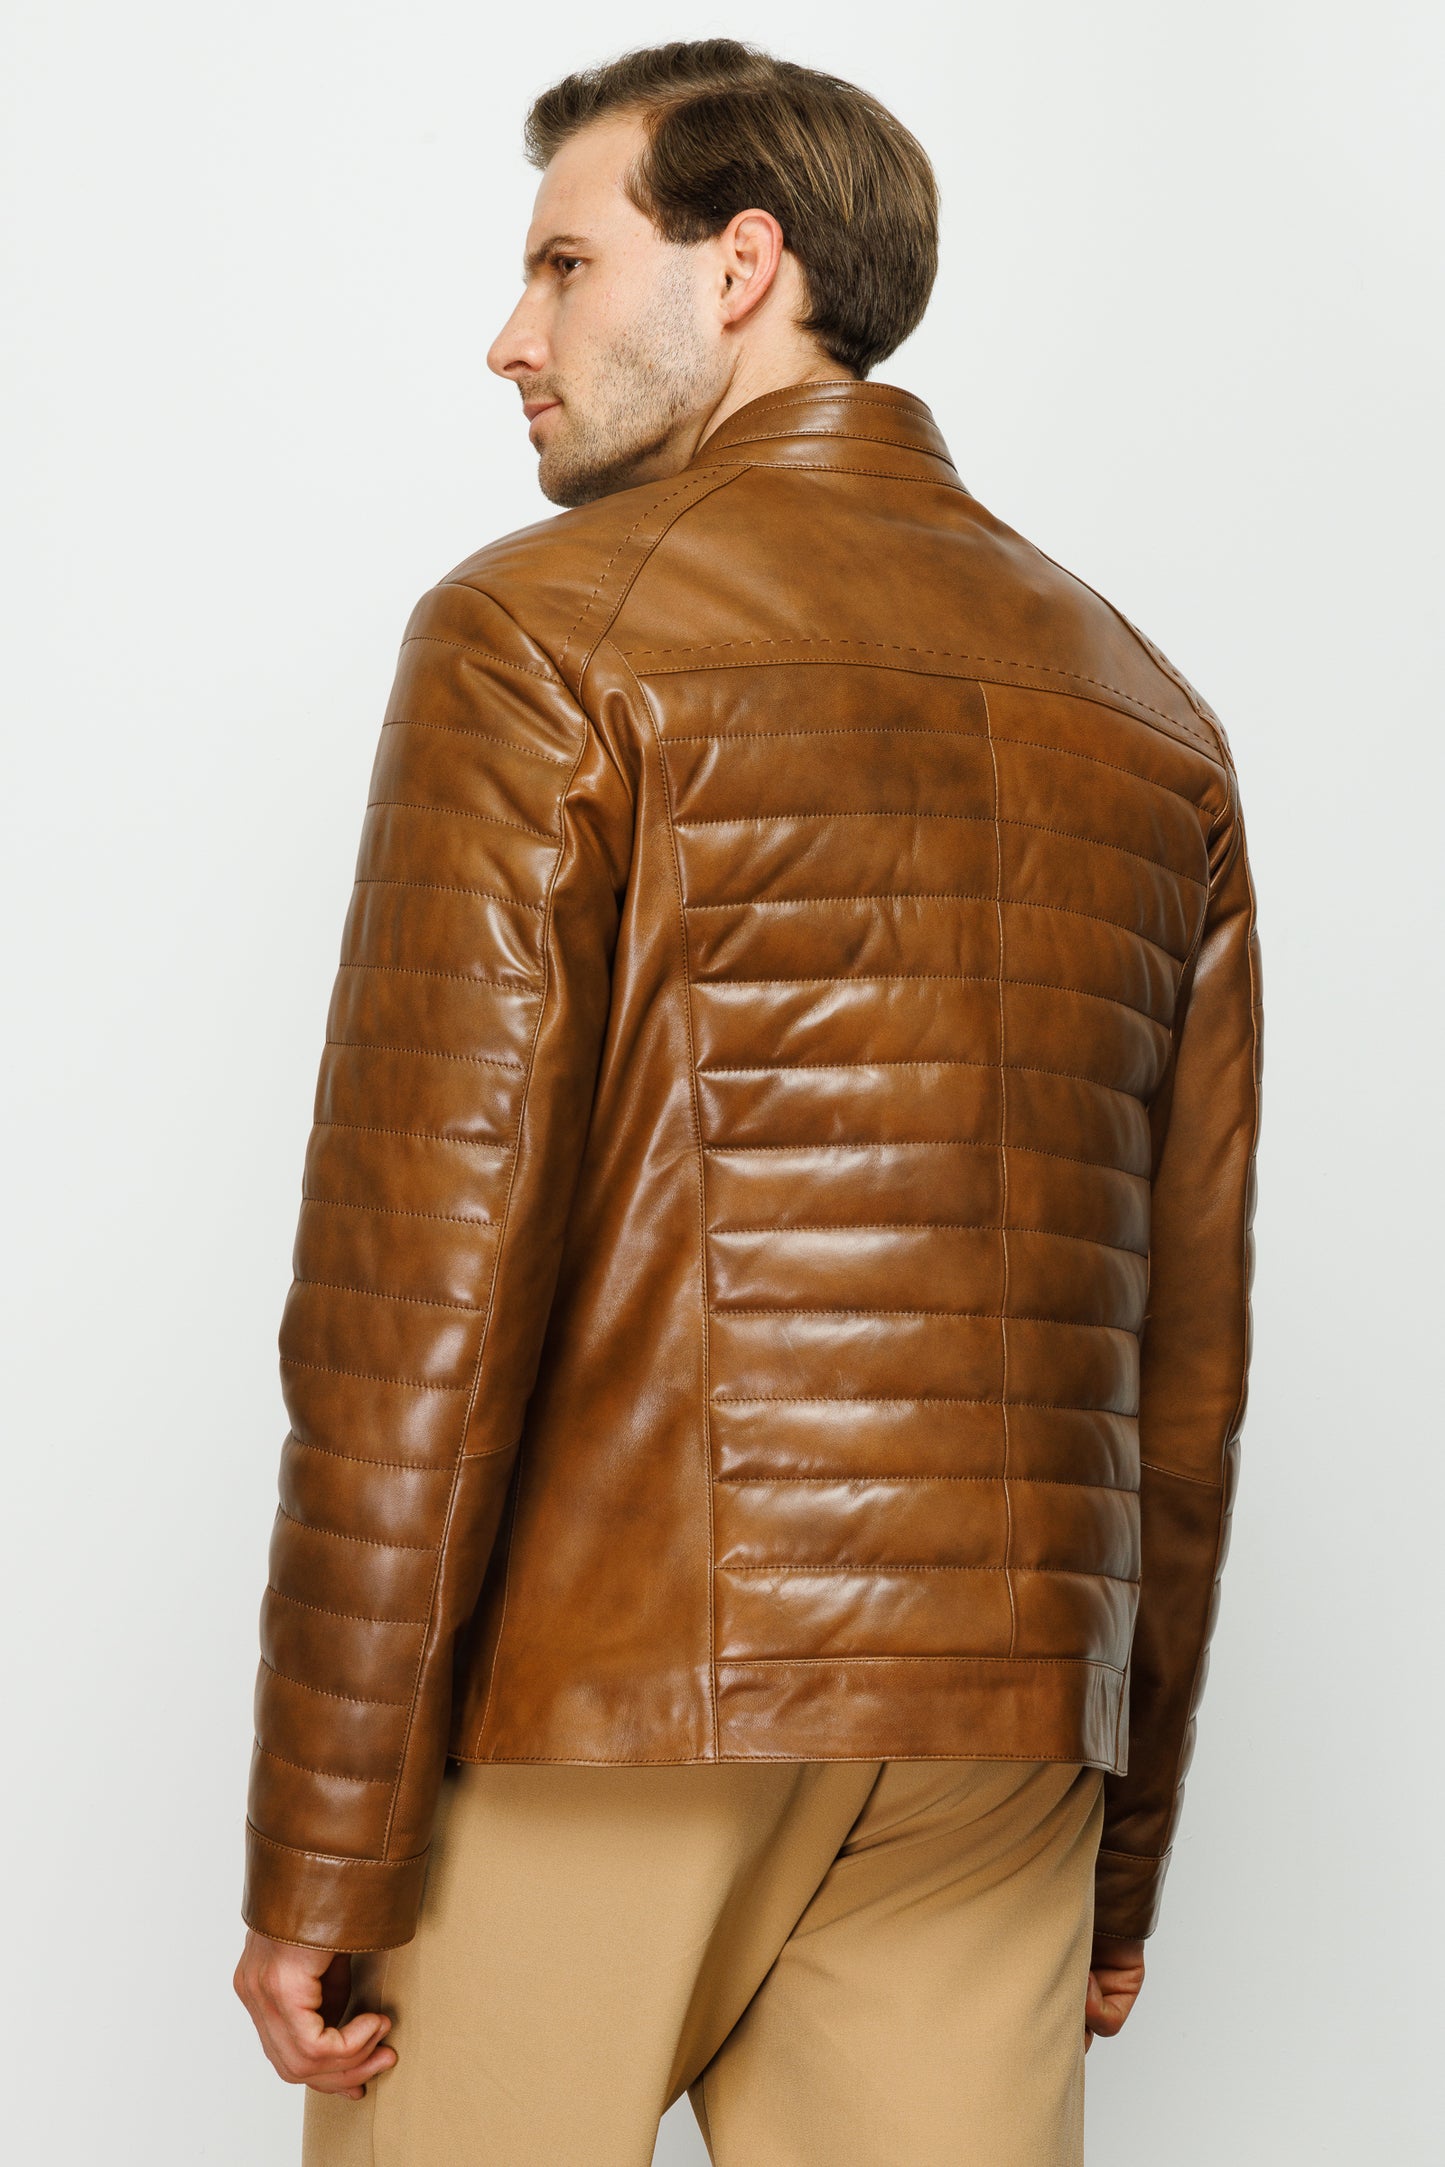 The Wilkerson Tan Leather Men Jacket